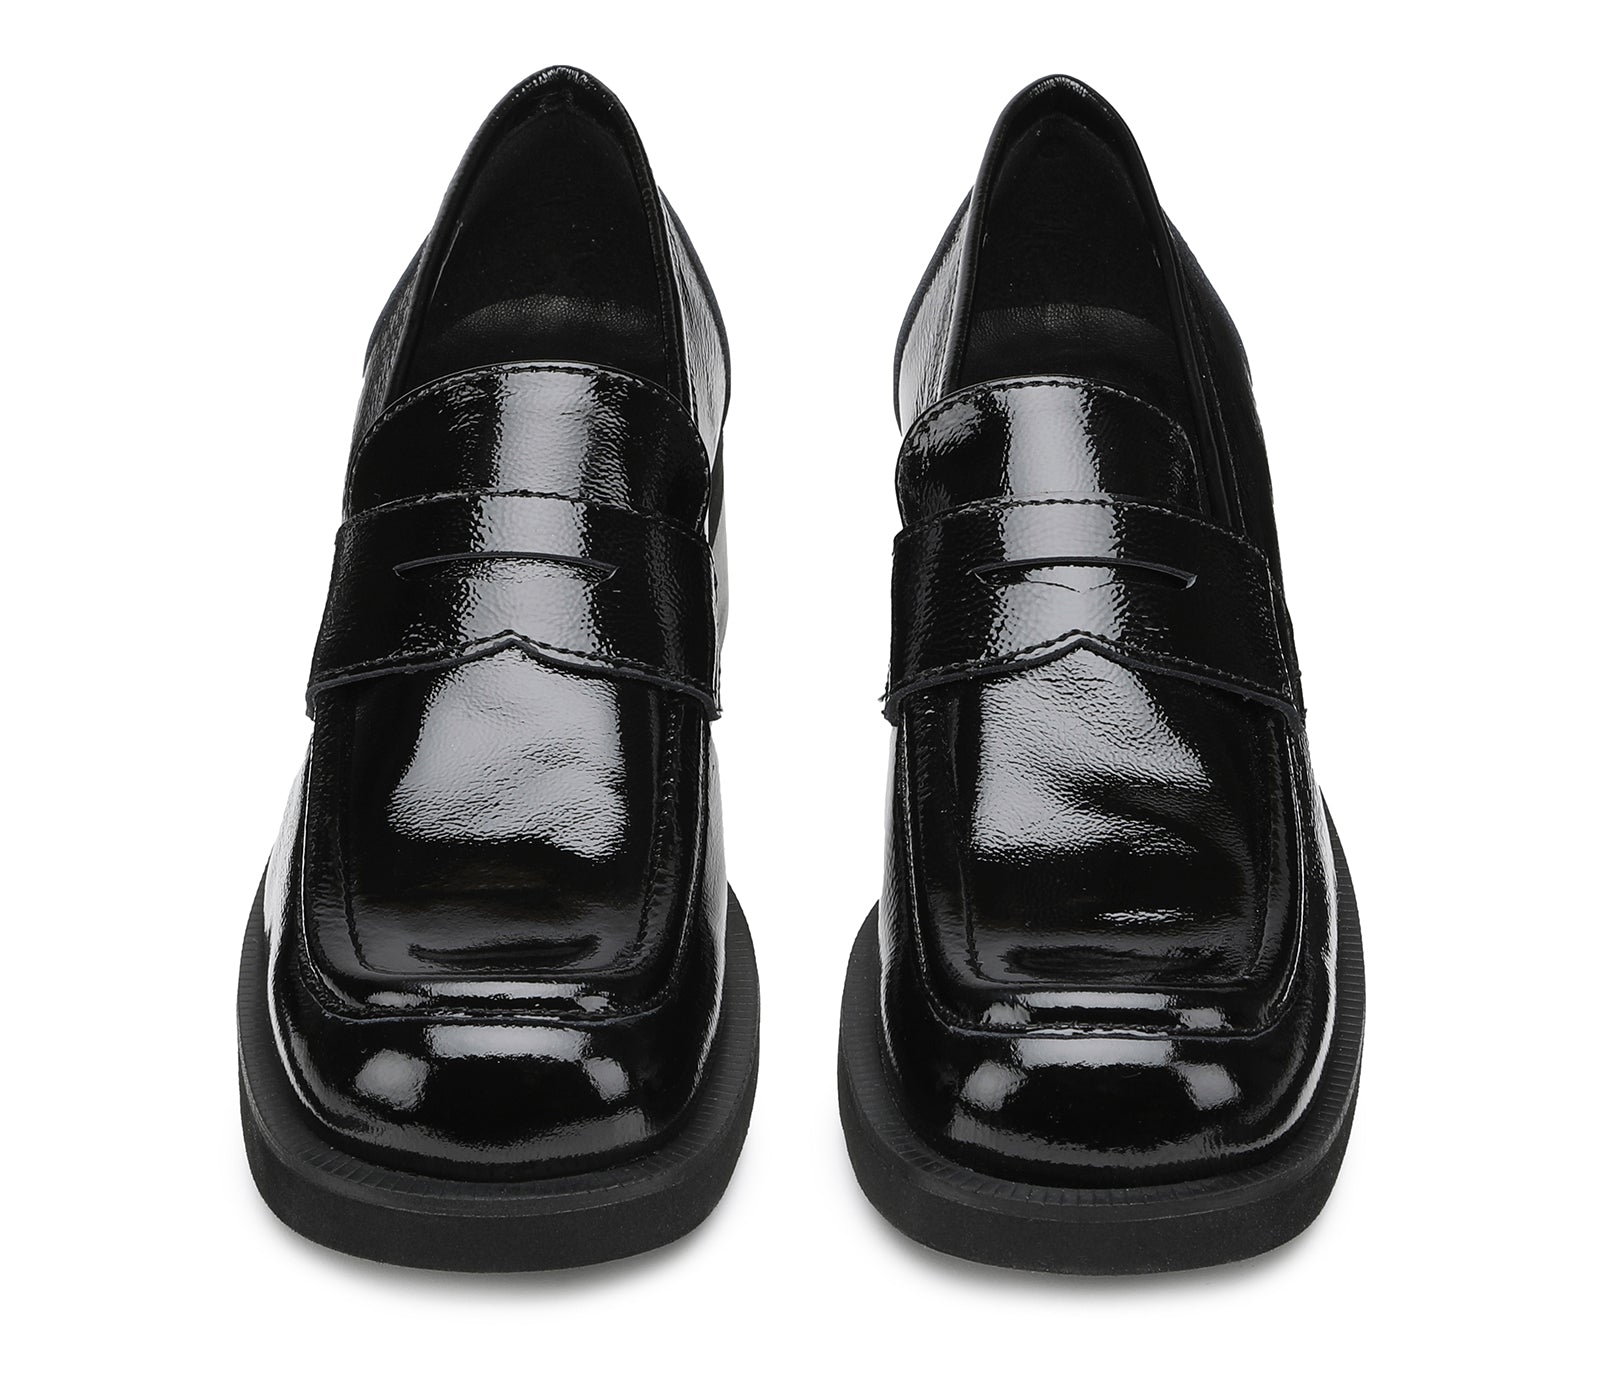 Women's Moccasins in Black Patent Leather with Square Toe and Rubber Sole